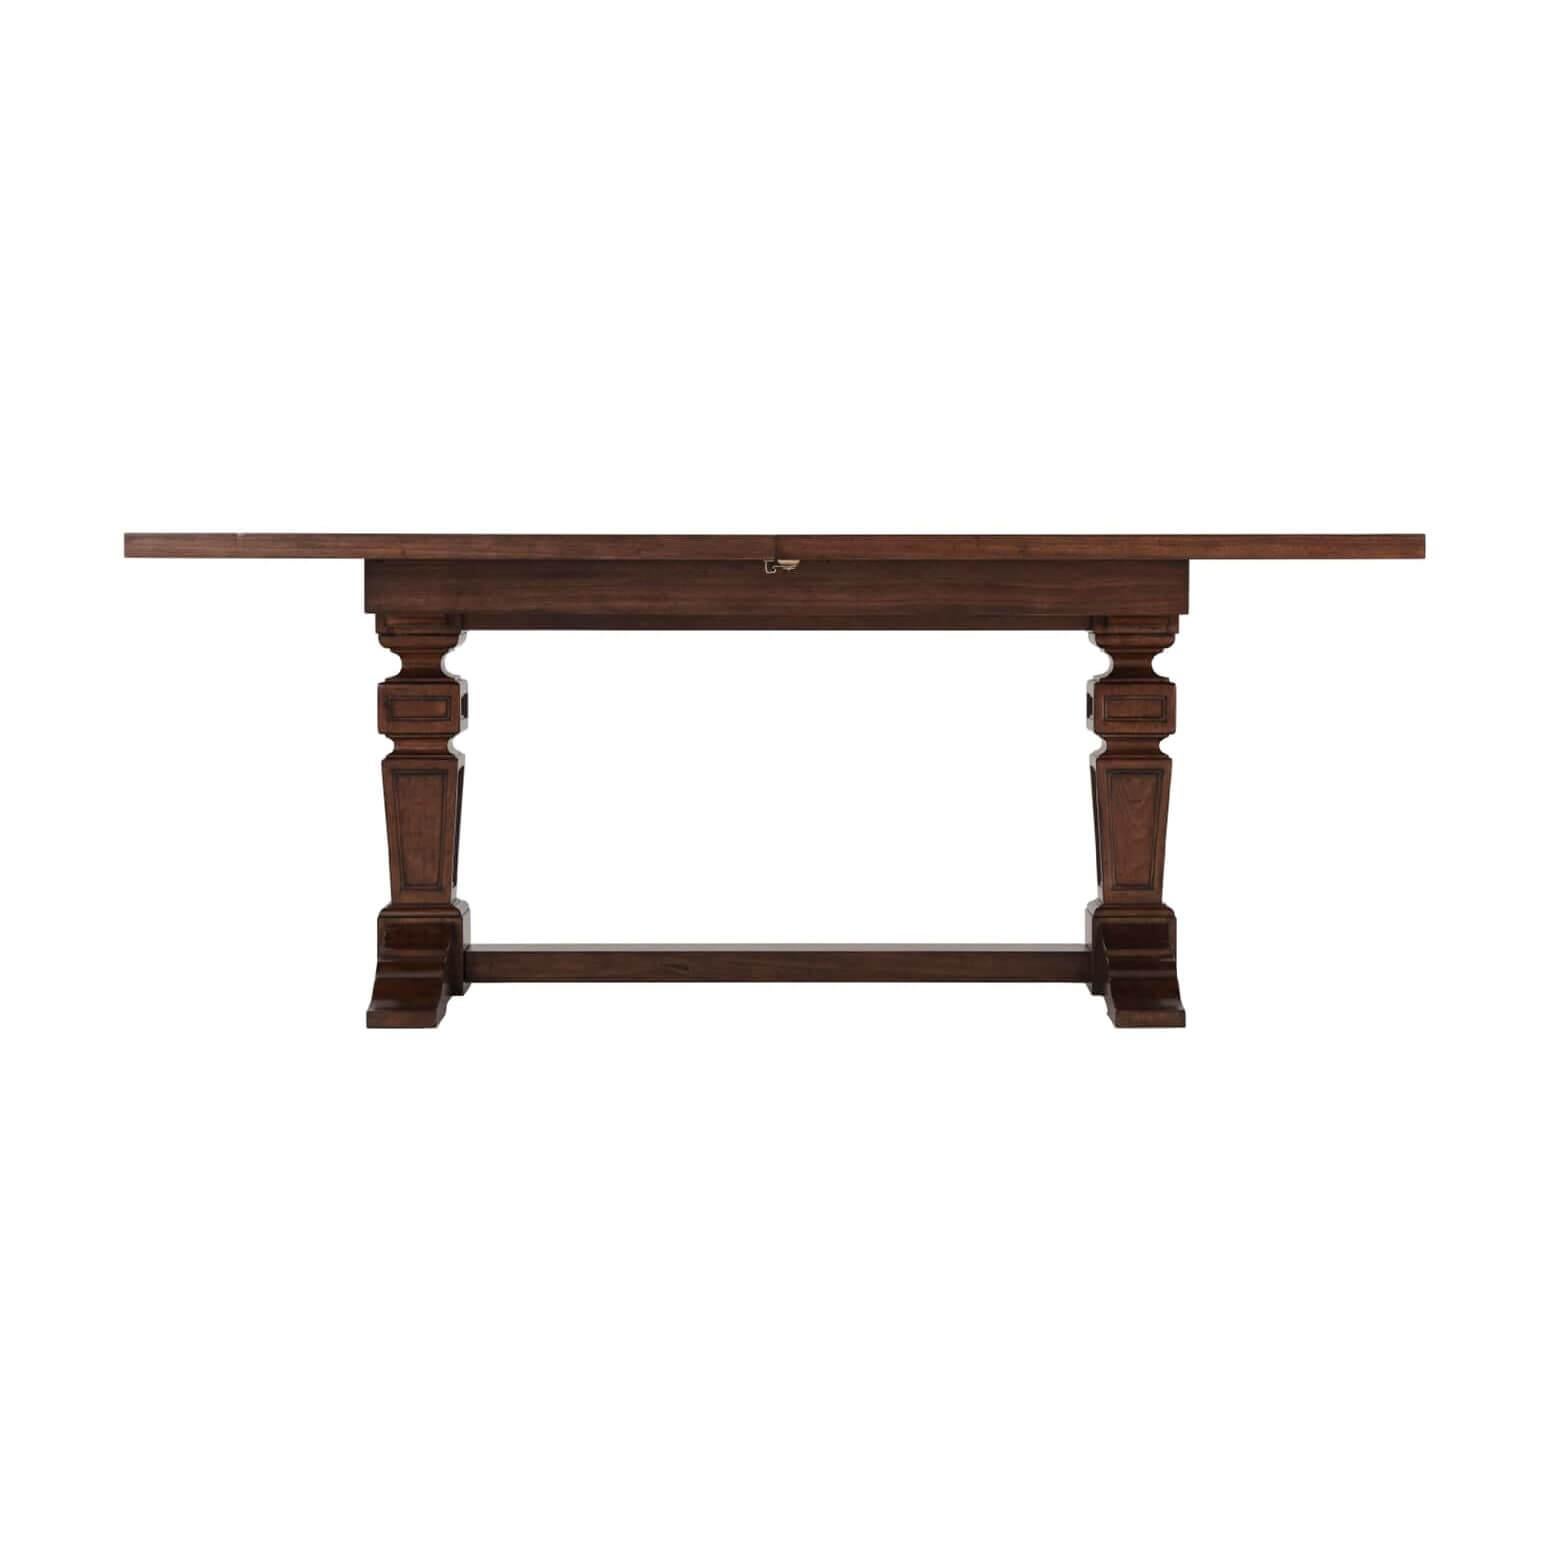 French Provincial Provincial Neoclassic Extension Dining Table For Sale